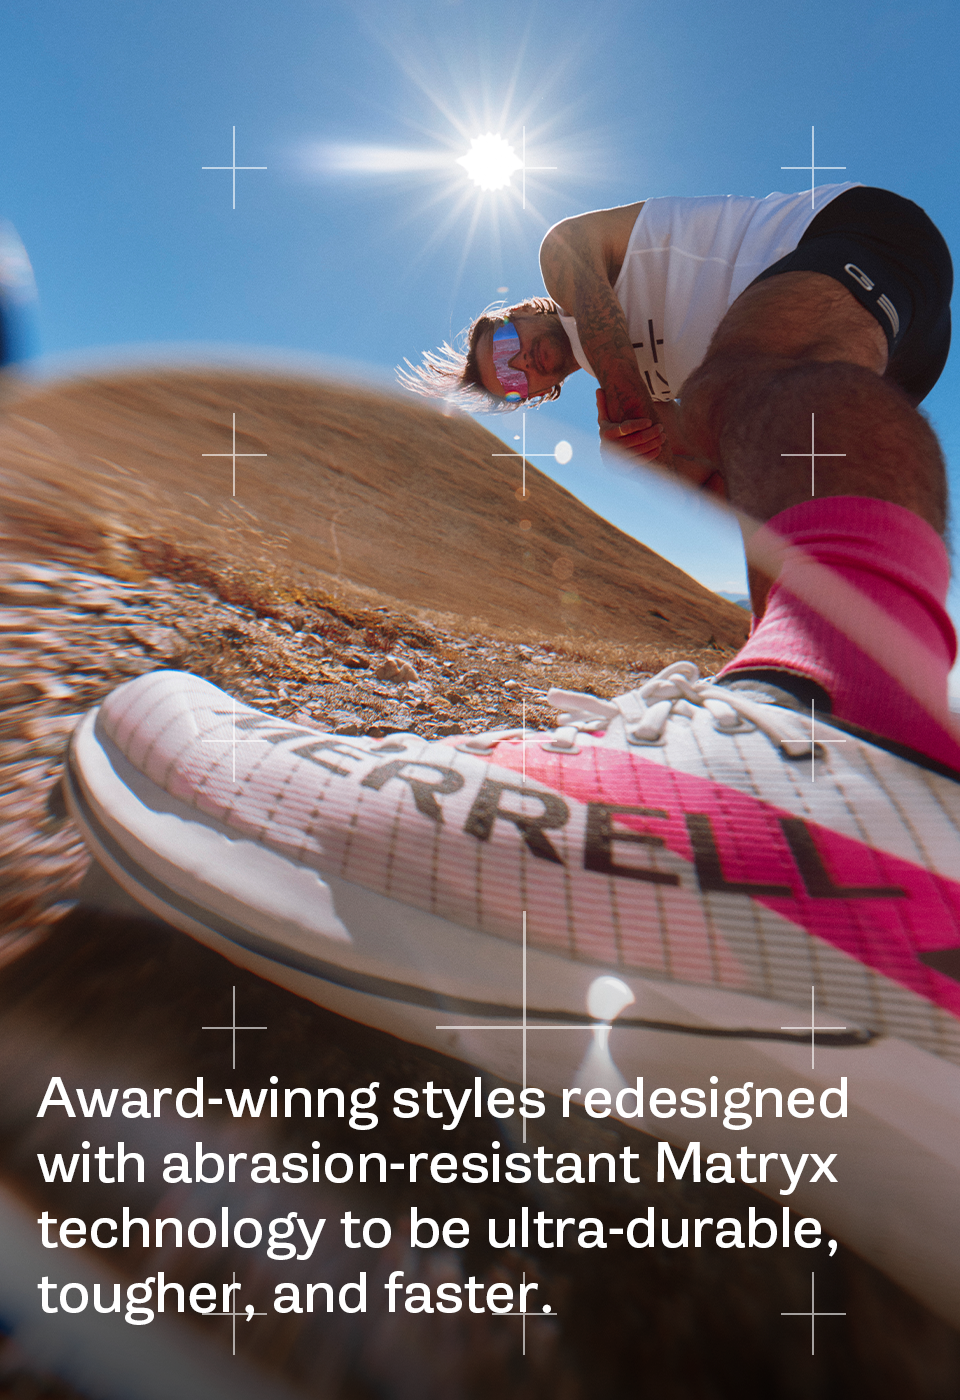 Award-winng styles redesigned with abrasion-resistant Matryx technology to be ultra-durable, tougher, and faster.